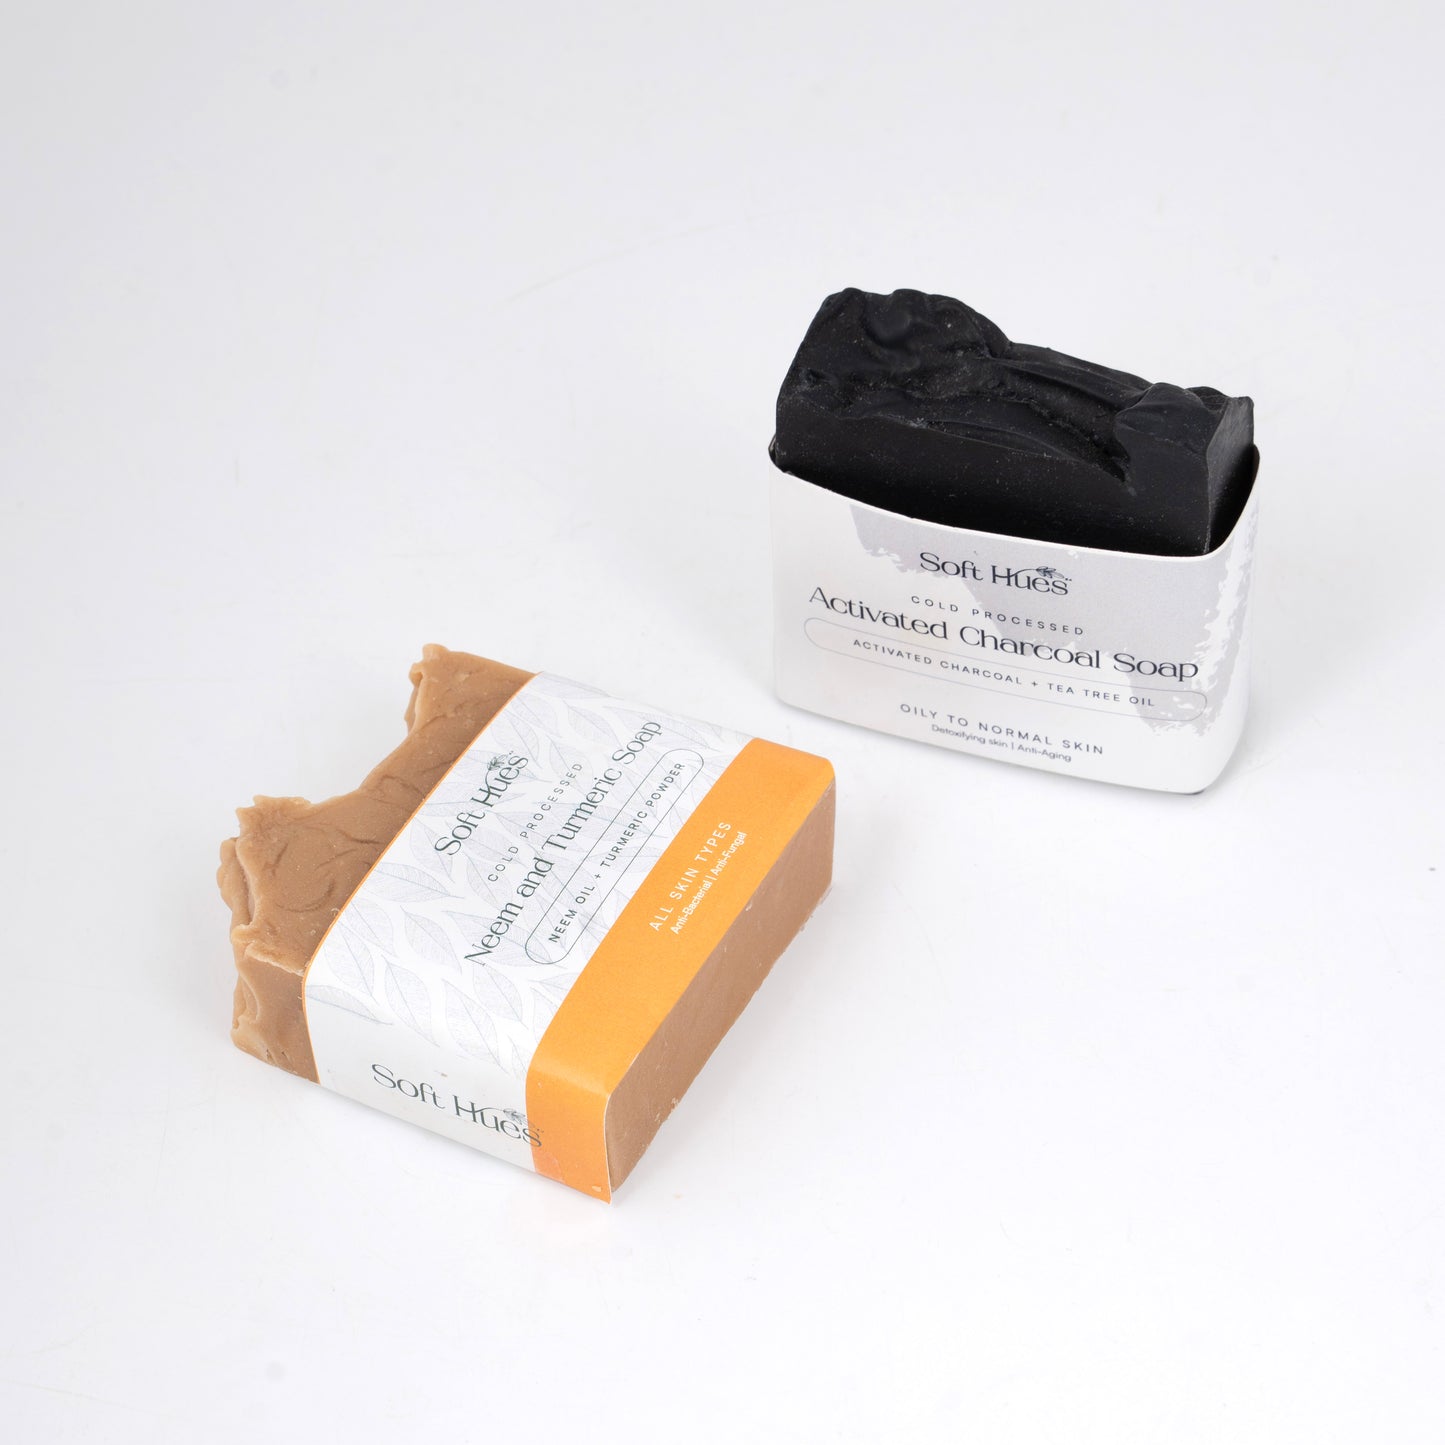 Acne fighting combo ( Cold Processed Neem and Turmeric Soap + Cold Processed Charcoal Soap)